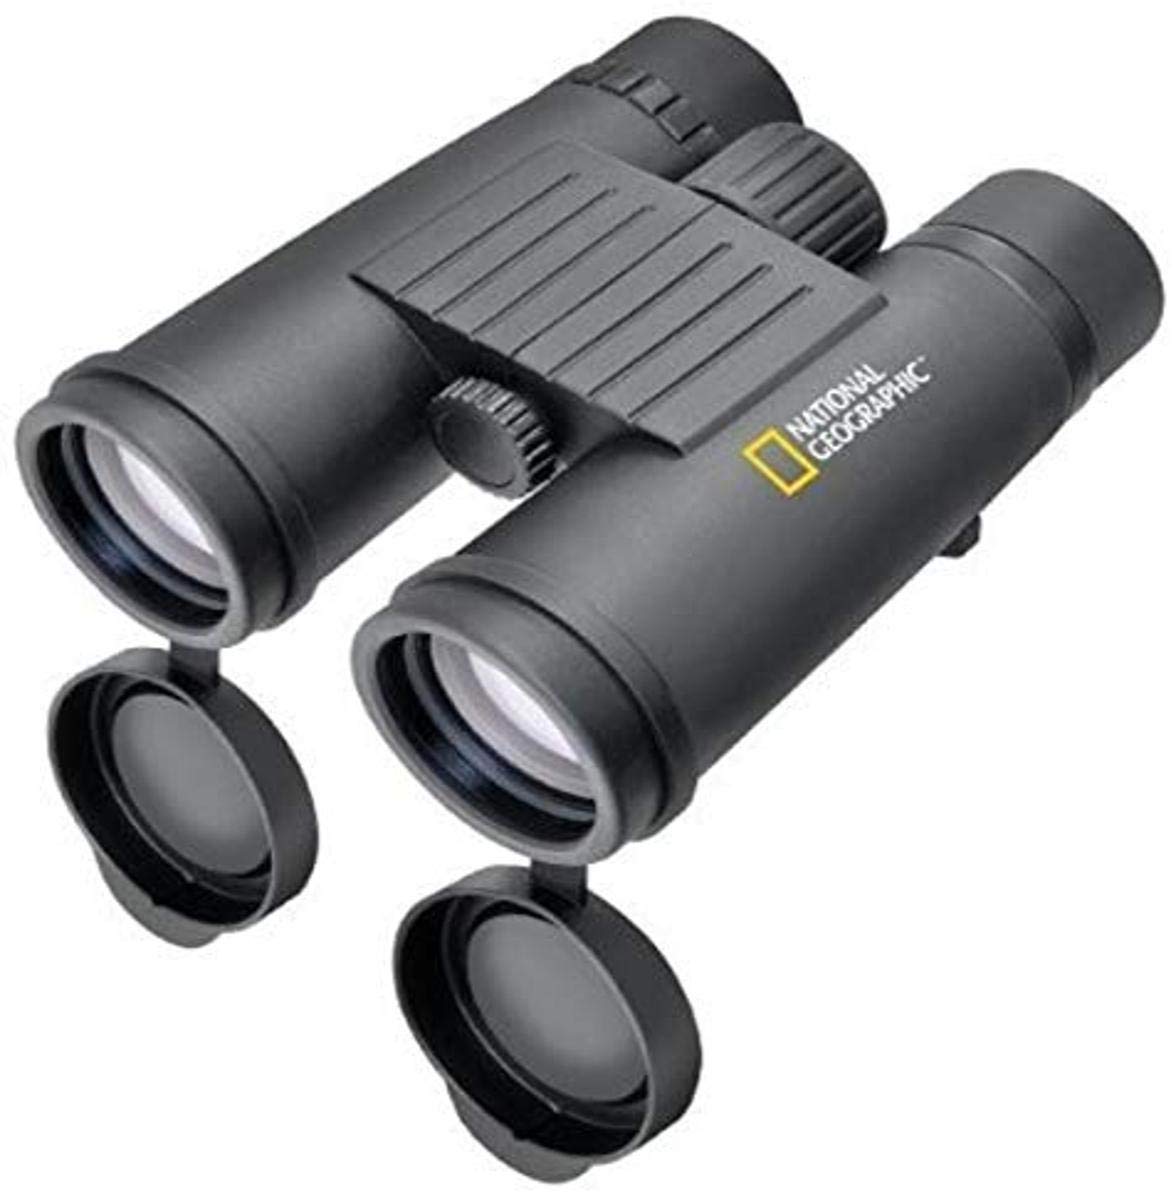 National Geographic 8x42mm Binoculars $13.22 + Free Shipping w/ Prime or on $35+